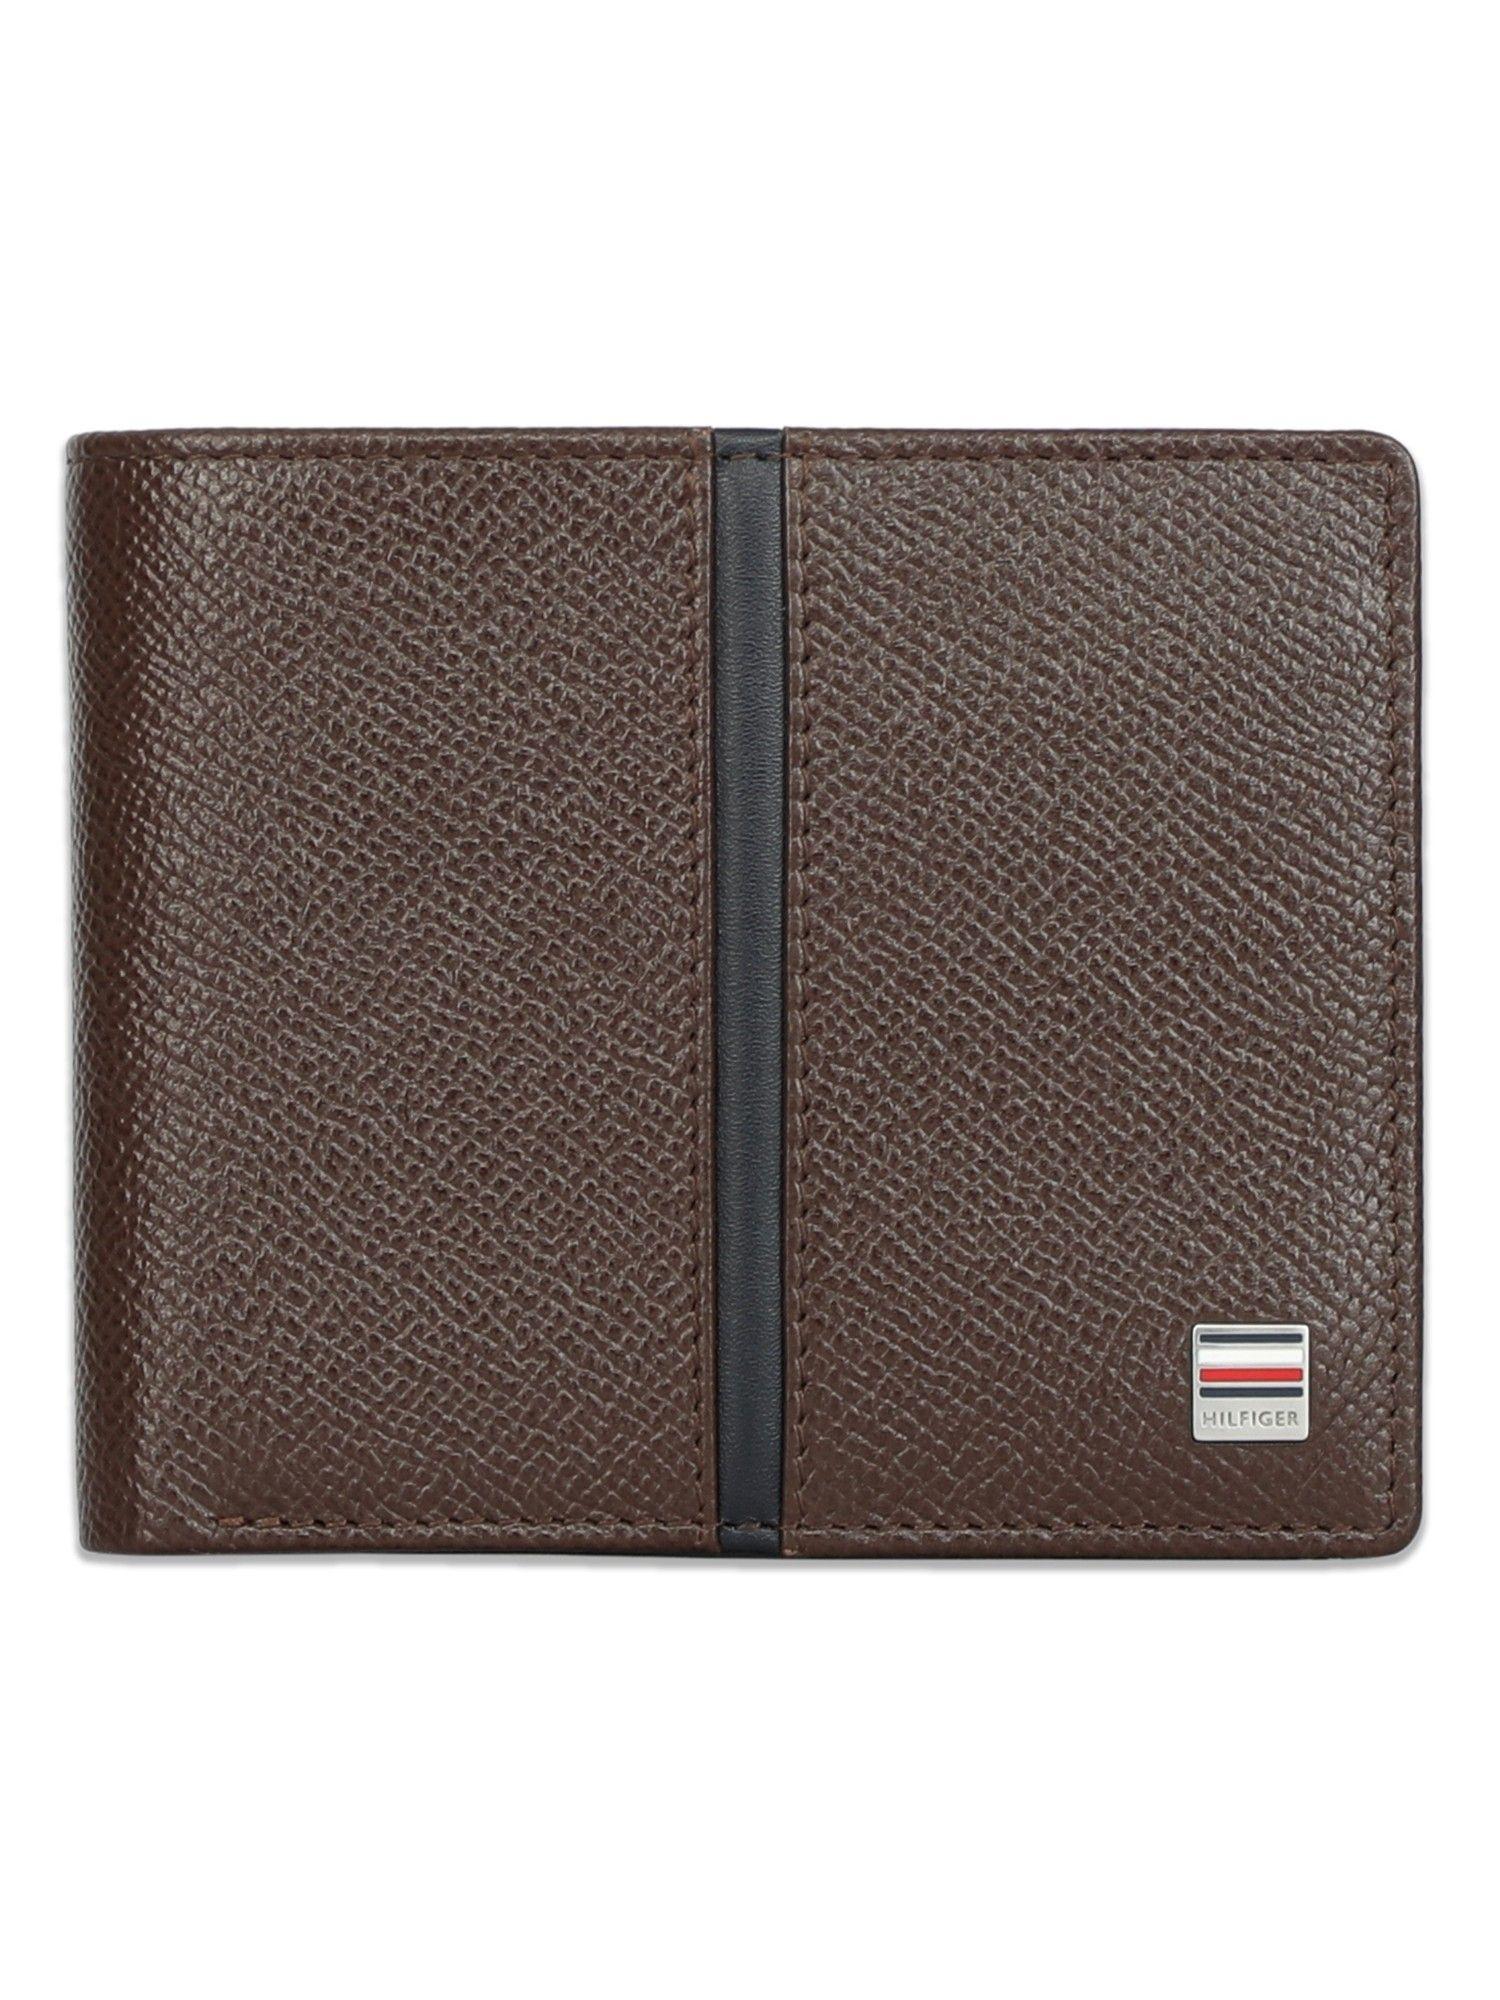 renato mens leather global coin wallet textured brown